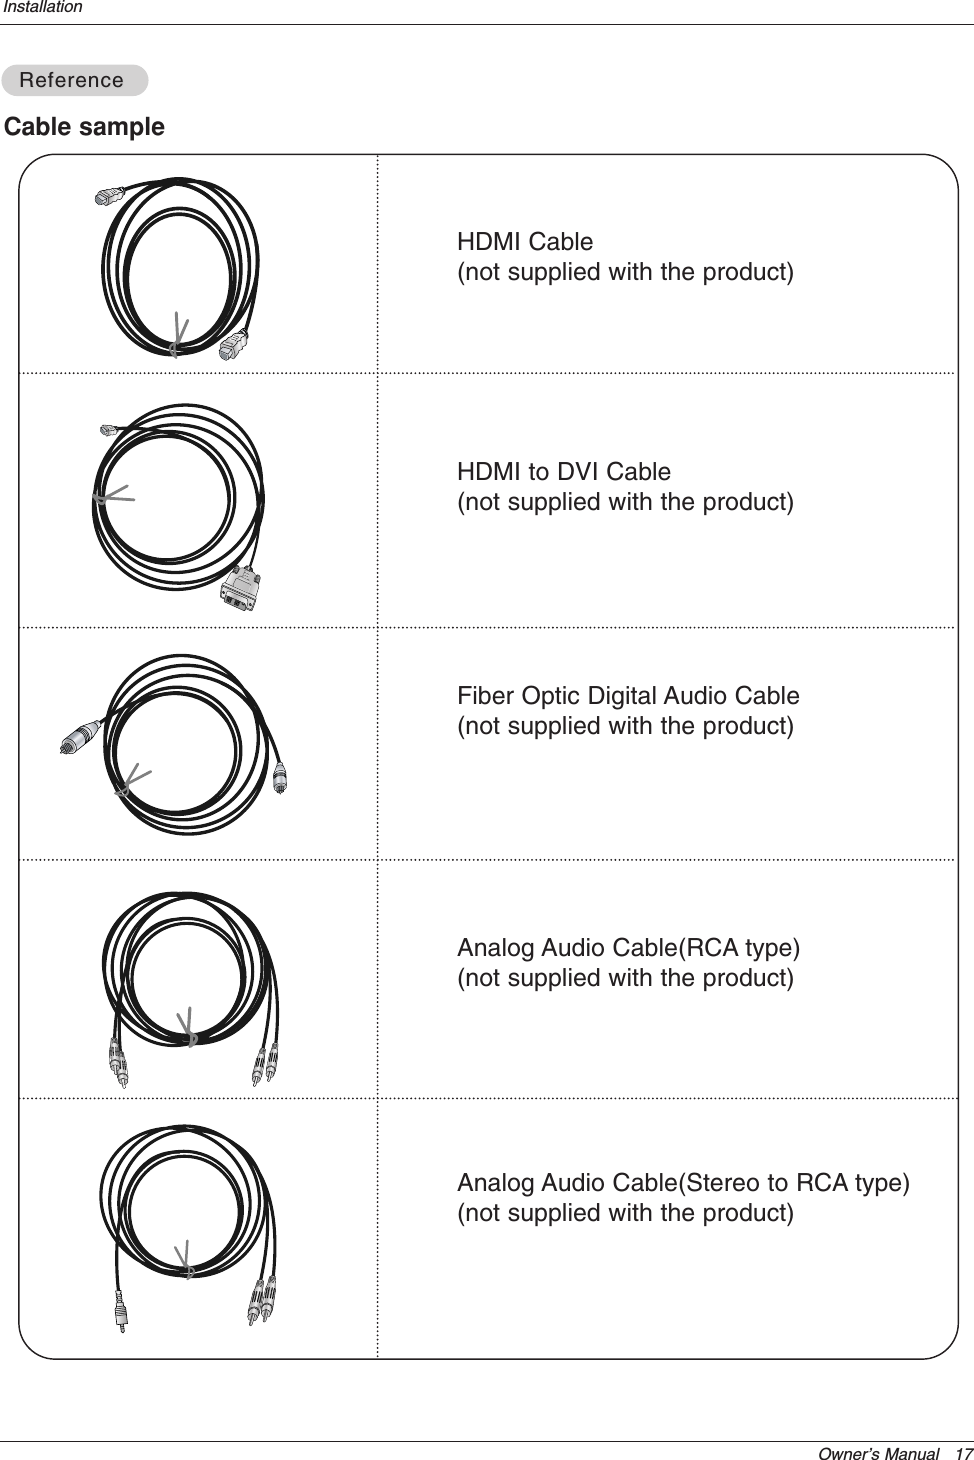 Owner’s Manual   17InstallationCable sampleHDMI Cable (not supplied with the product)HDMI to DVI Cable (not supplied with the product)Fiber Optic Digital Audio Cable(not supplied with the product)Analog Audio Cable(RCA type)(not supplied with the product)Analog Audio Cable(Stereo to RCA type)(not supplied with the product)ReferenceReference